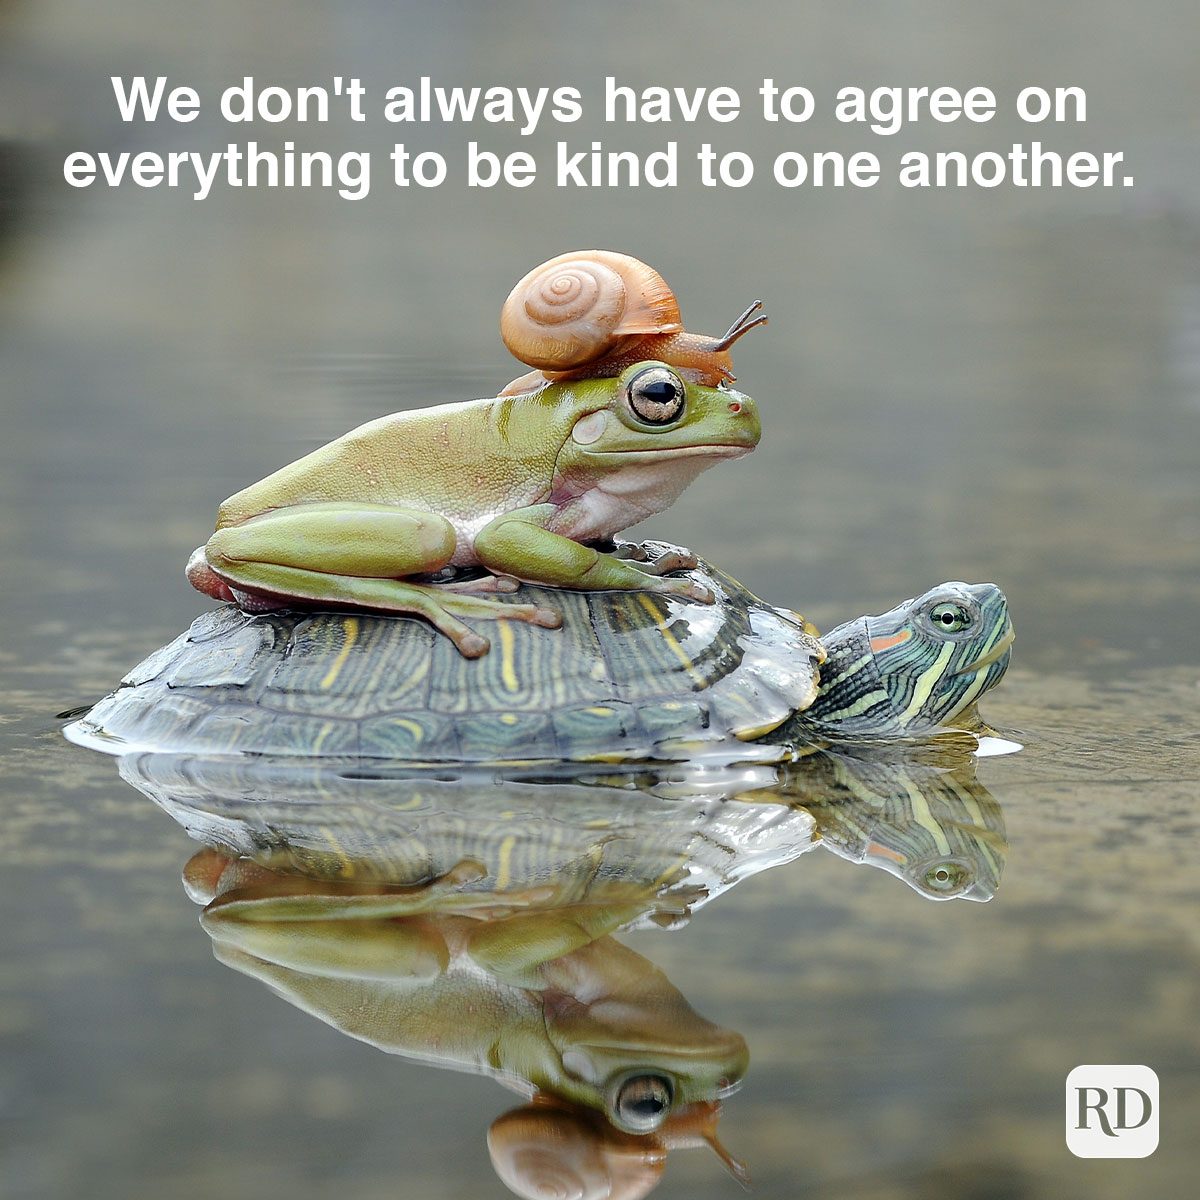 We Don't Always Have To Agree On Everything To Be Kind To One Another